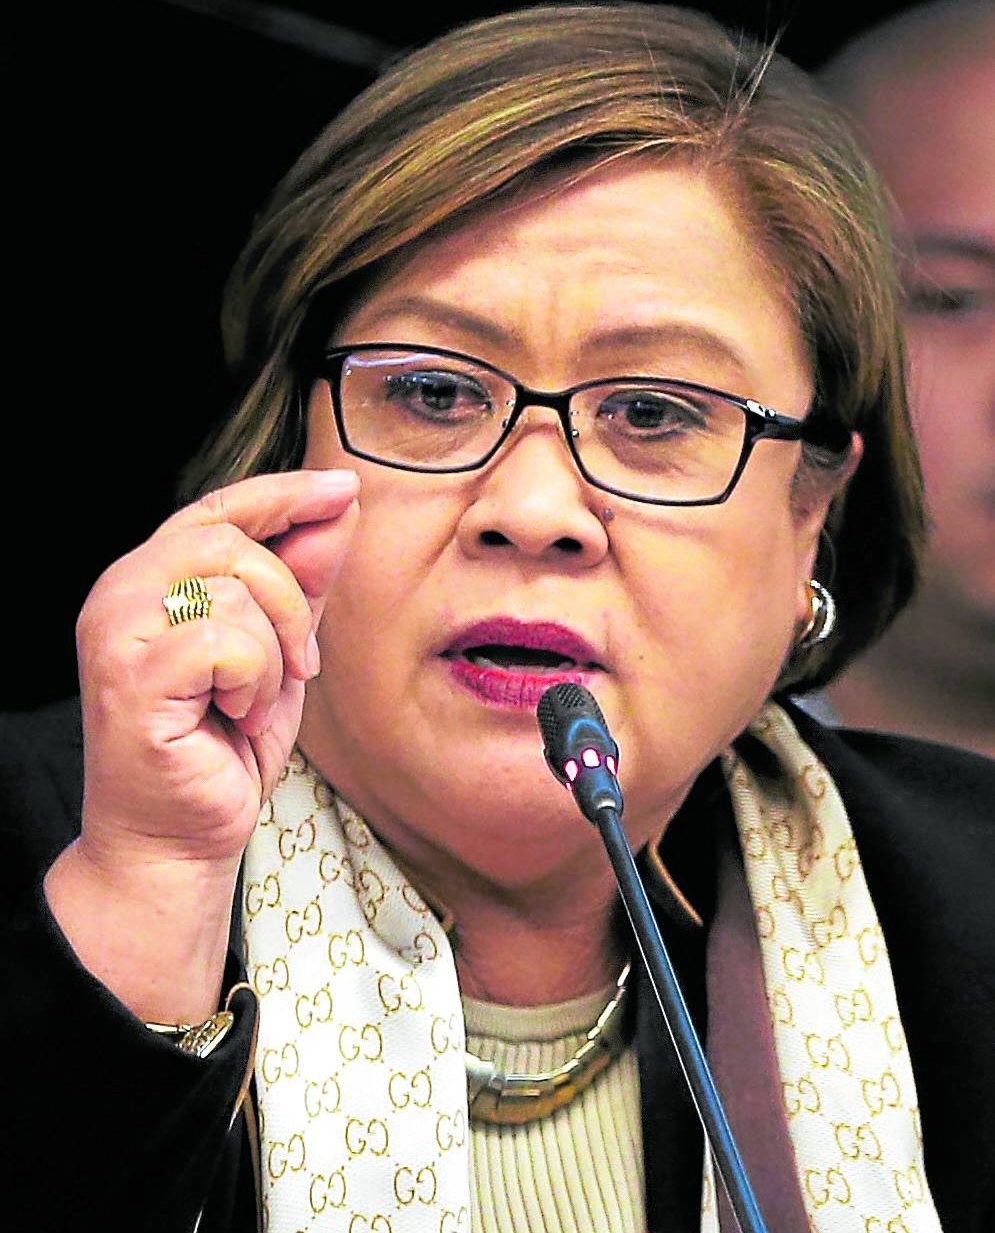 A no-election scenario in May 2022 might really be the goal of the PDP-Laban party under Energy Secretary Alfonso Cusi when they filed a petition seeking to reopen the filing of certificates of candidacy (COCs), detained Senator Leila de Lima claimed on Monday.